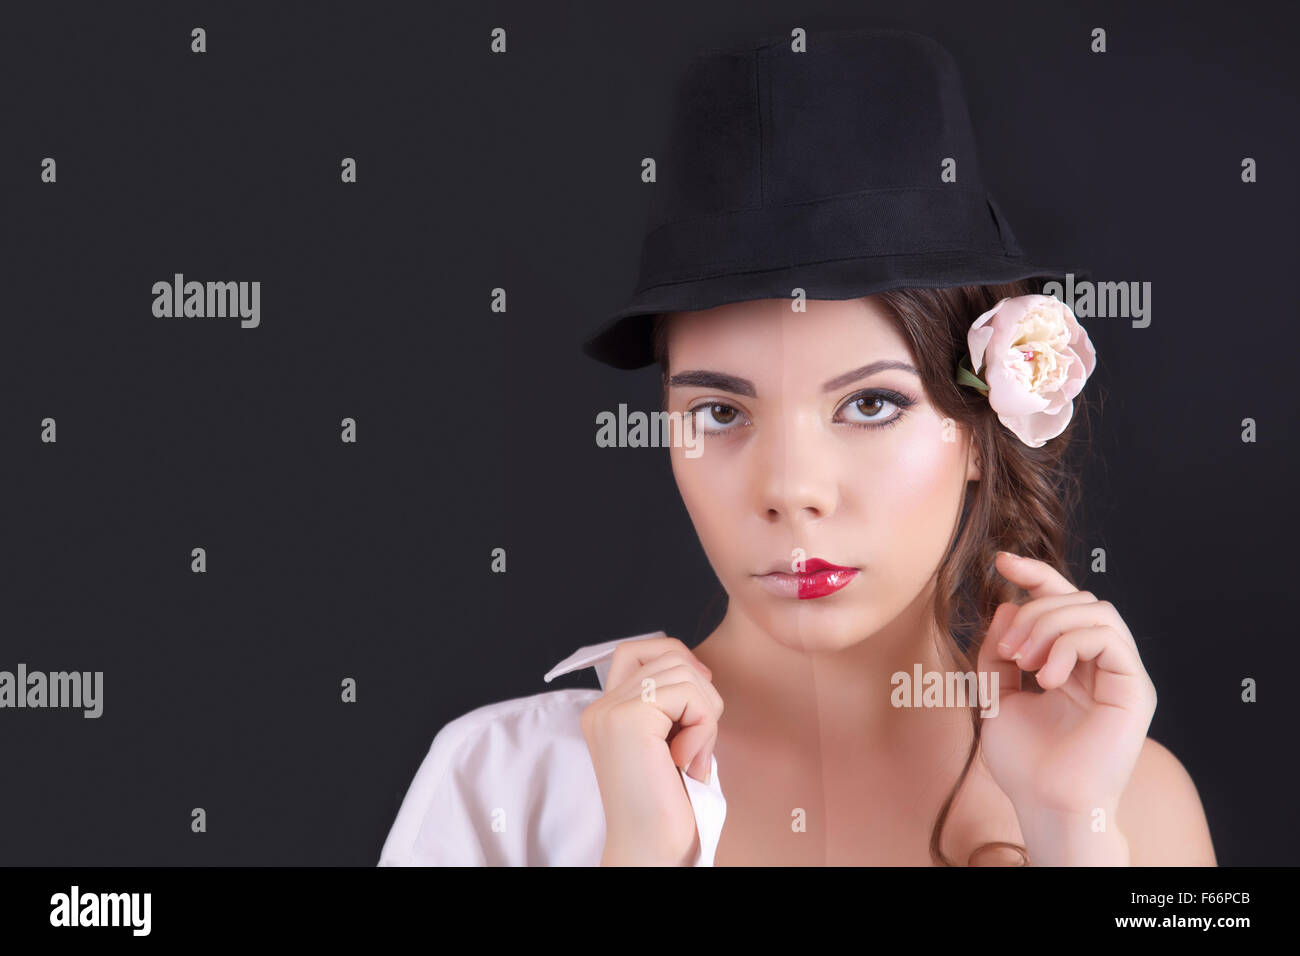 Portrait of a woman with a theatrical makeup on black background in studio Stock Photo